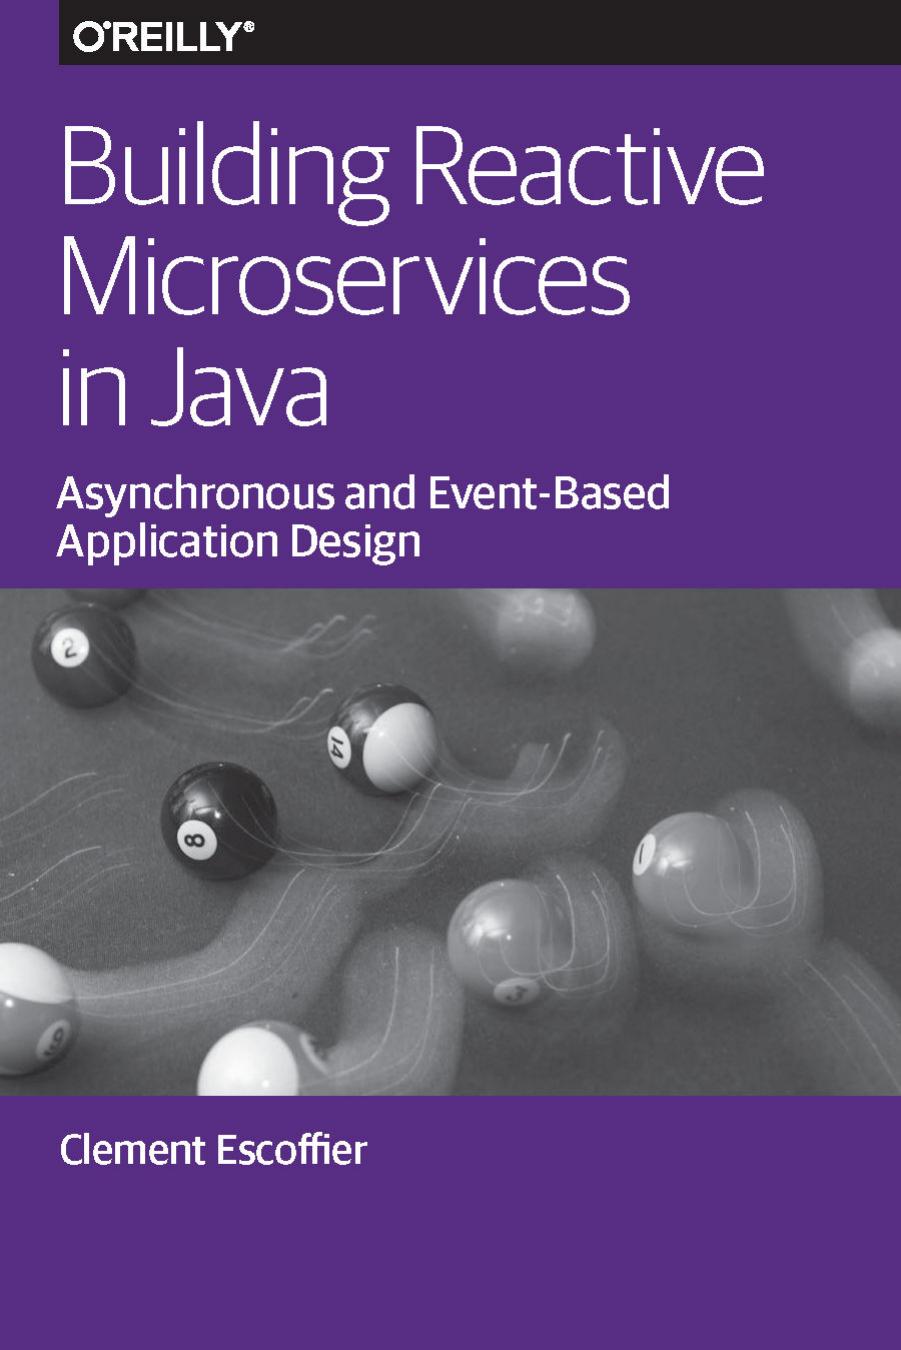 Building Reactive Microservices in Java: Asynchronous and Event-Based Application Design